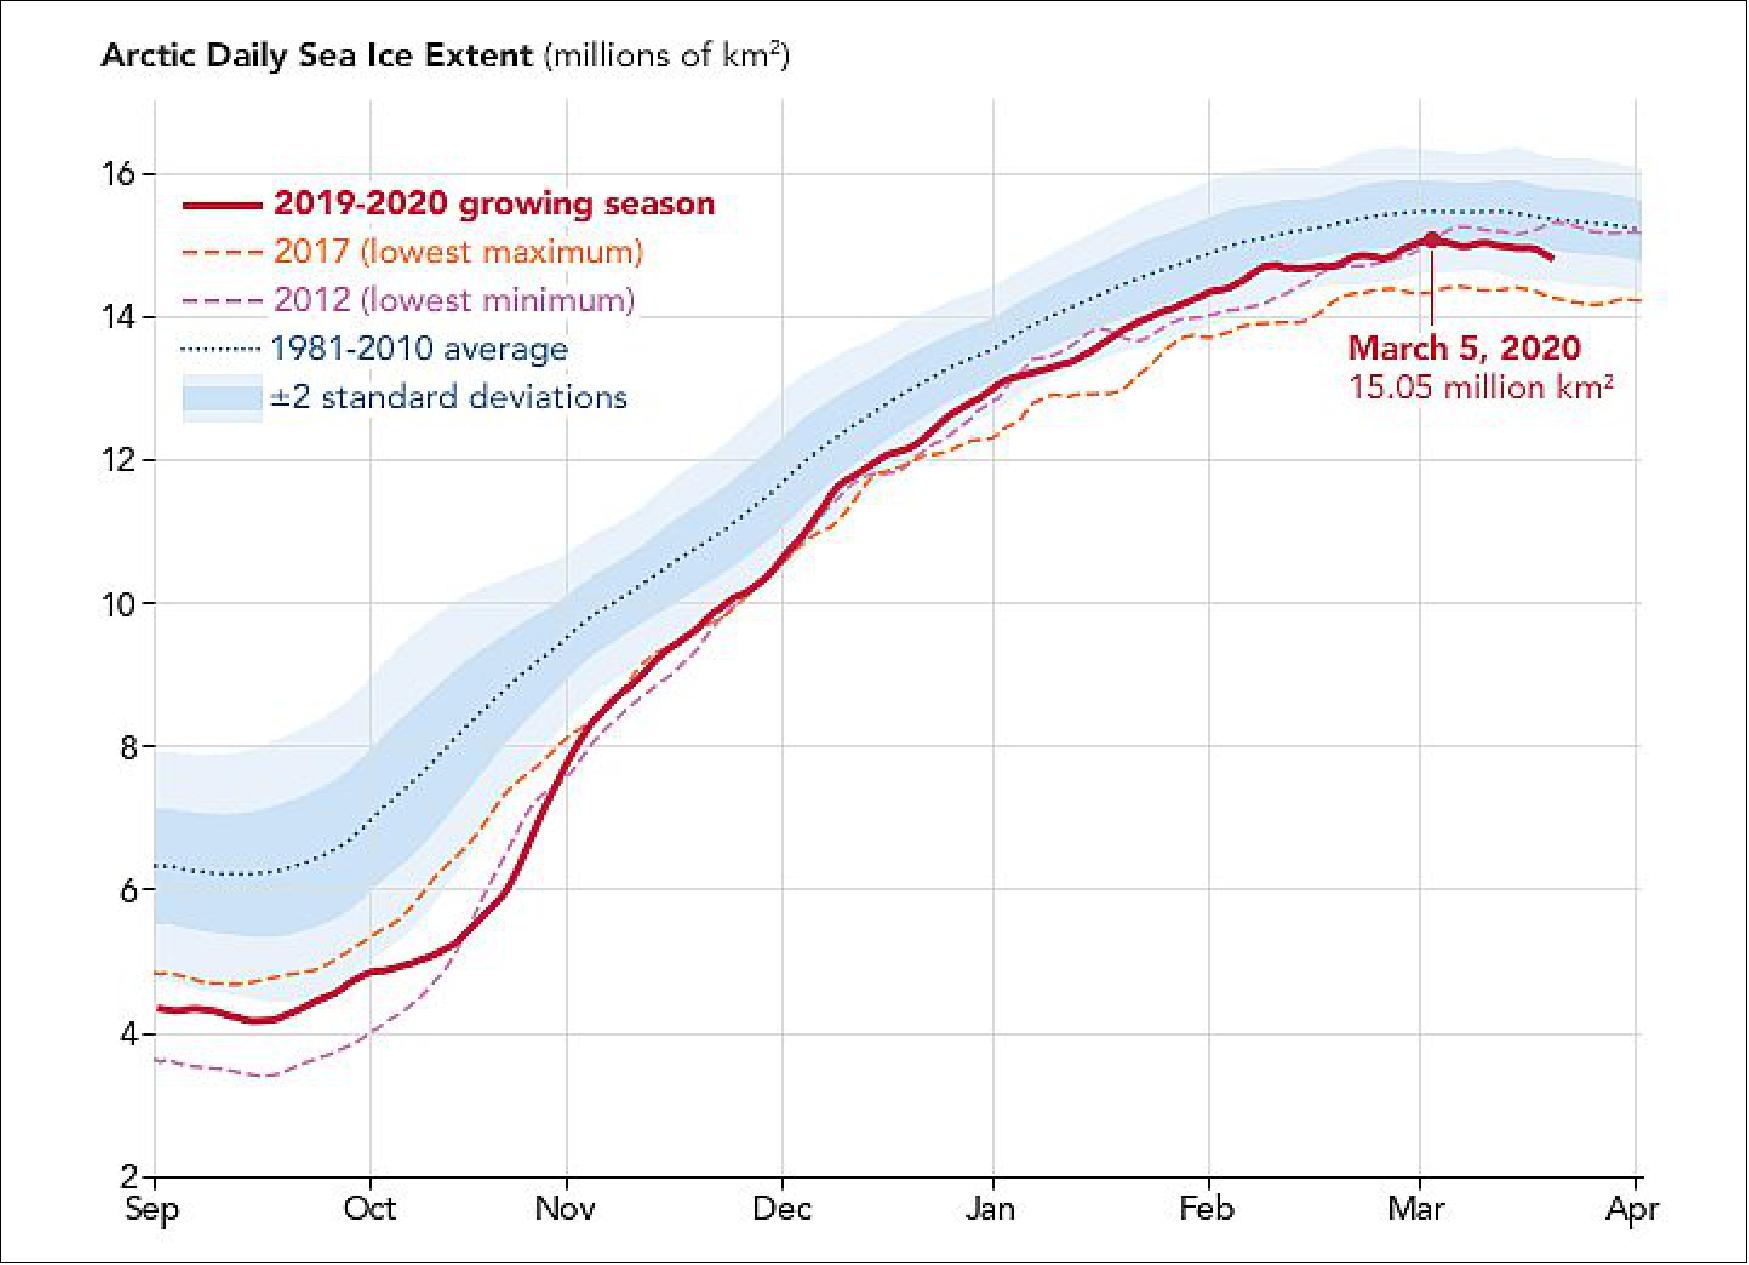 Figure 23: Arctic sea ice extend in the period September 1, 2019 - March 22, 2020 (image credit: NASA Earth Observatory)